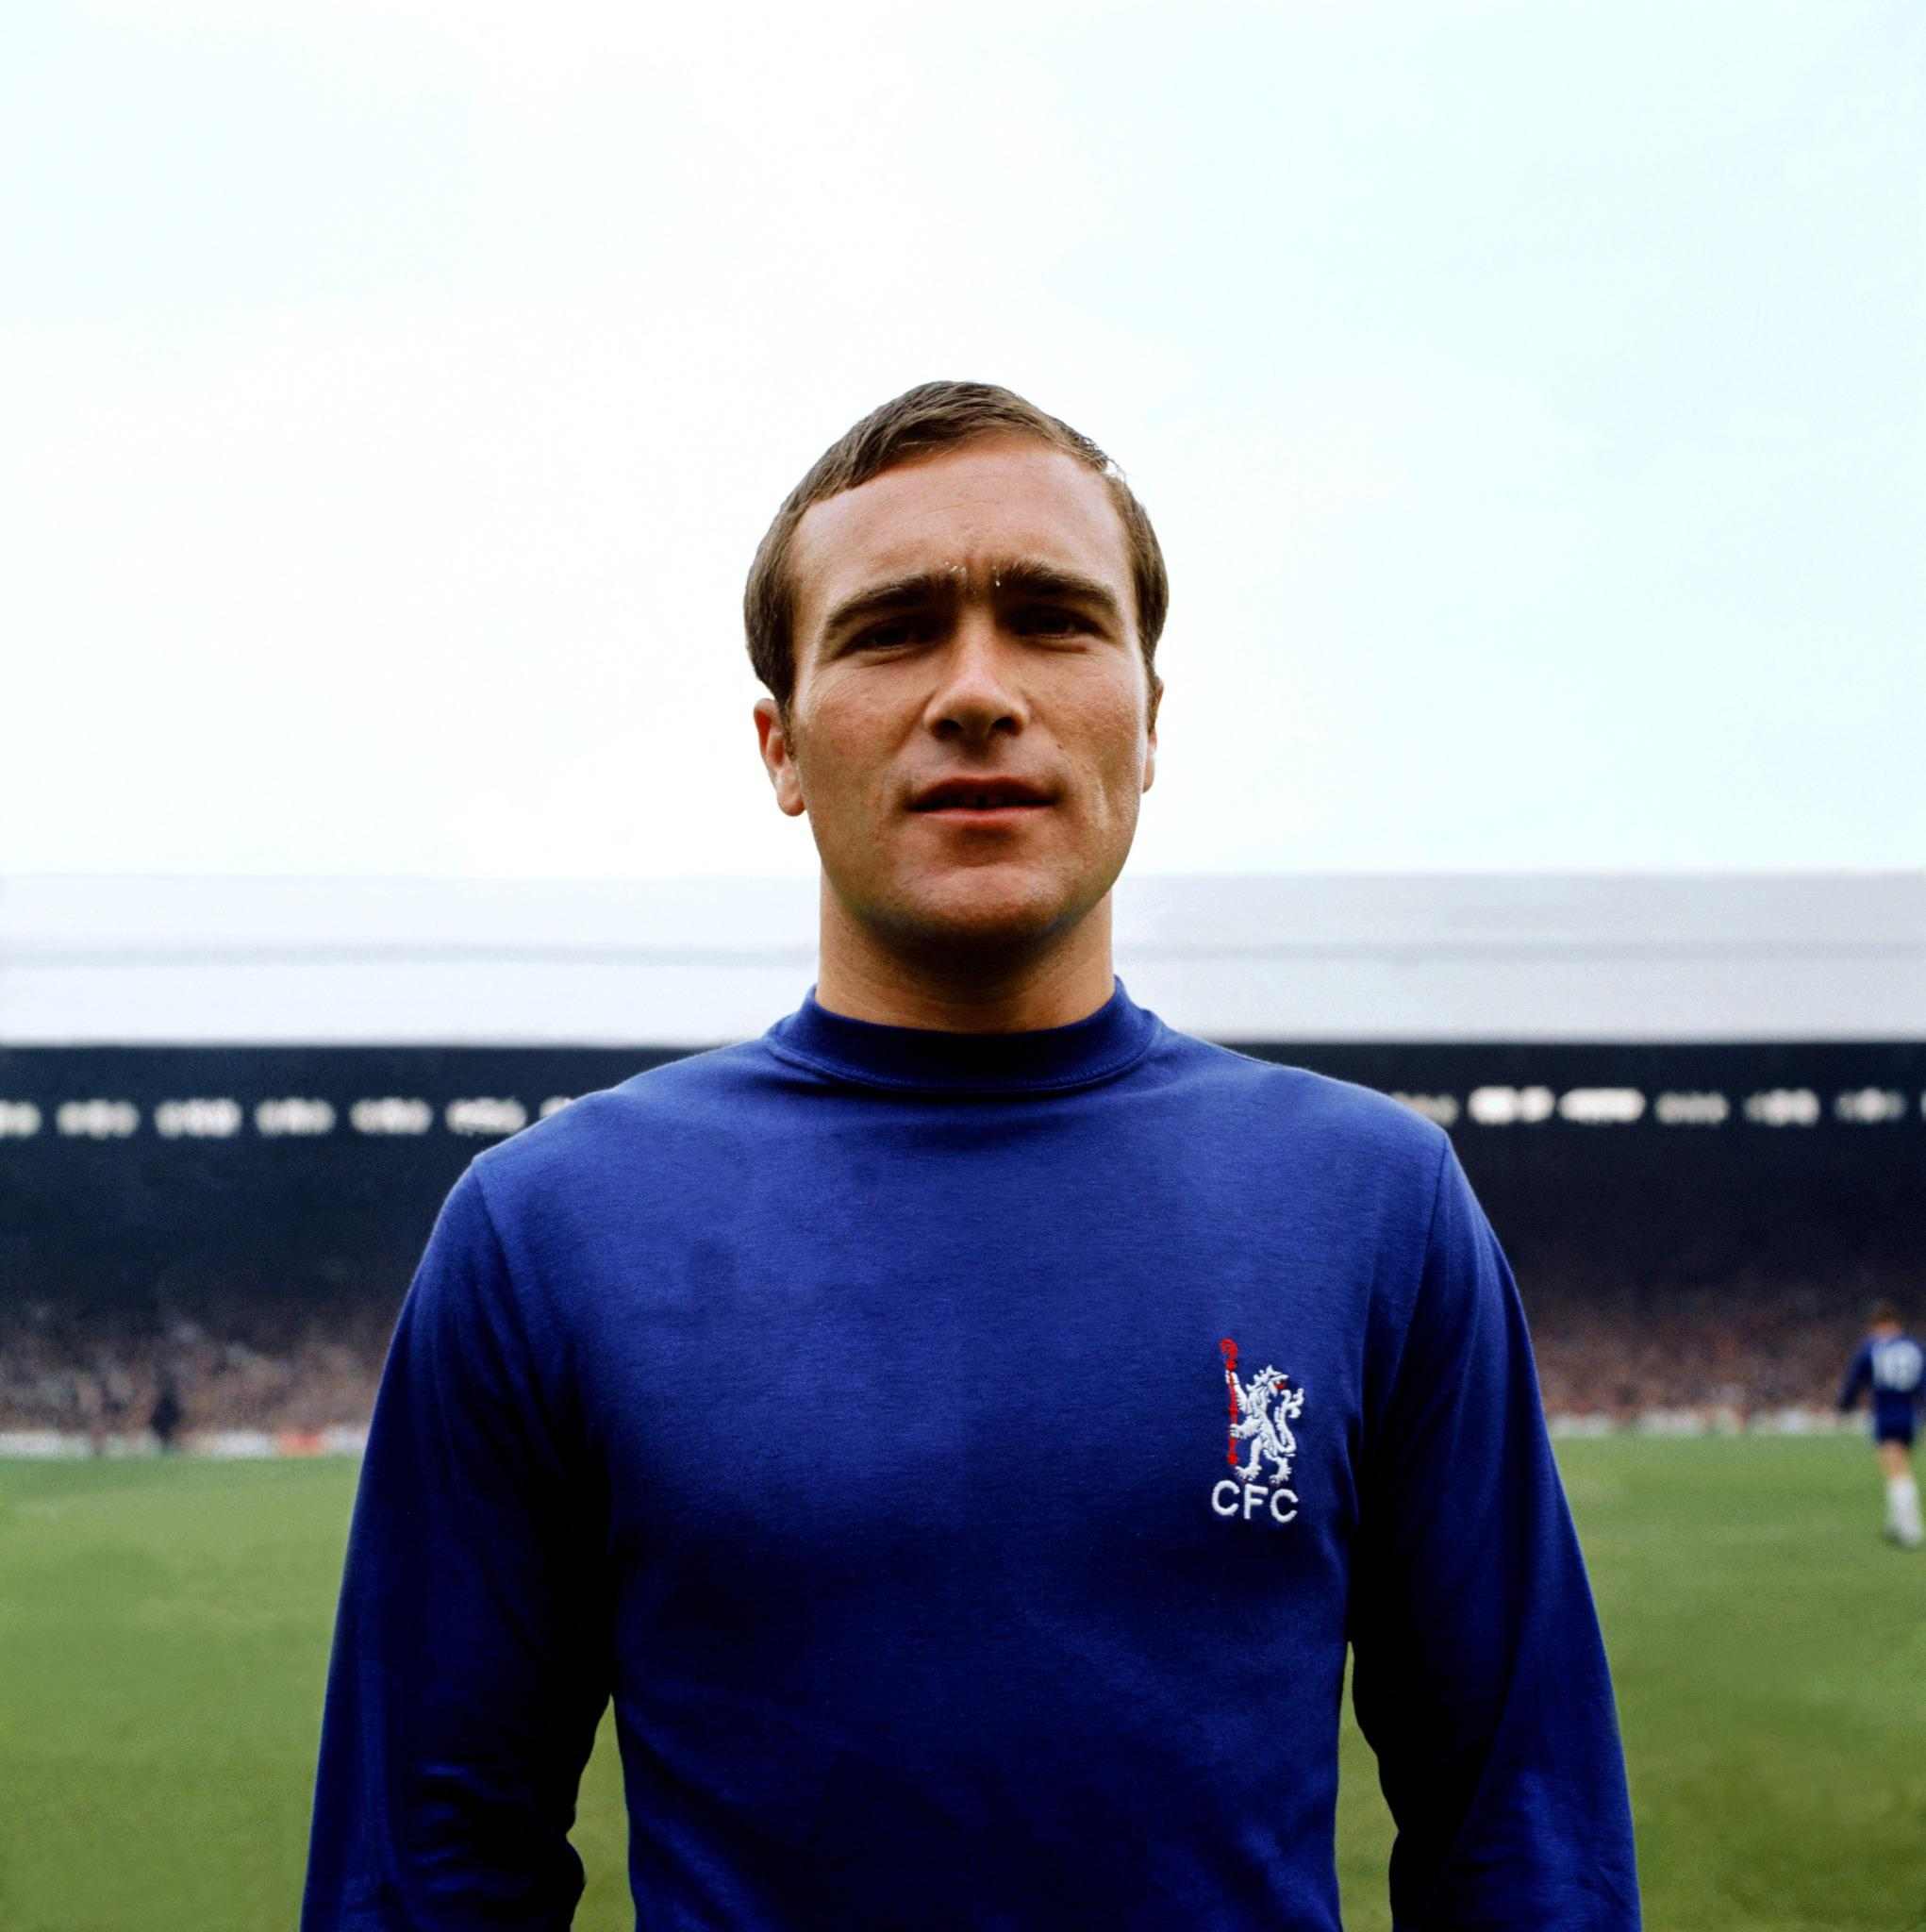 Ron Harris for Chelsea, Credit: Twitter/@ChelseaFC